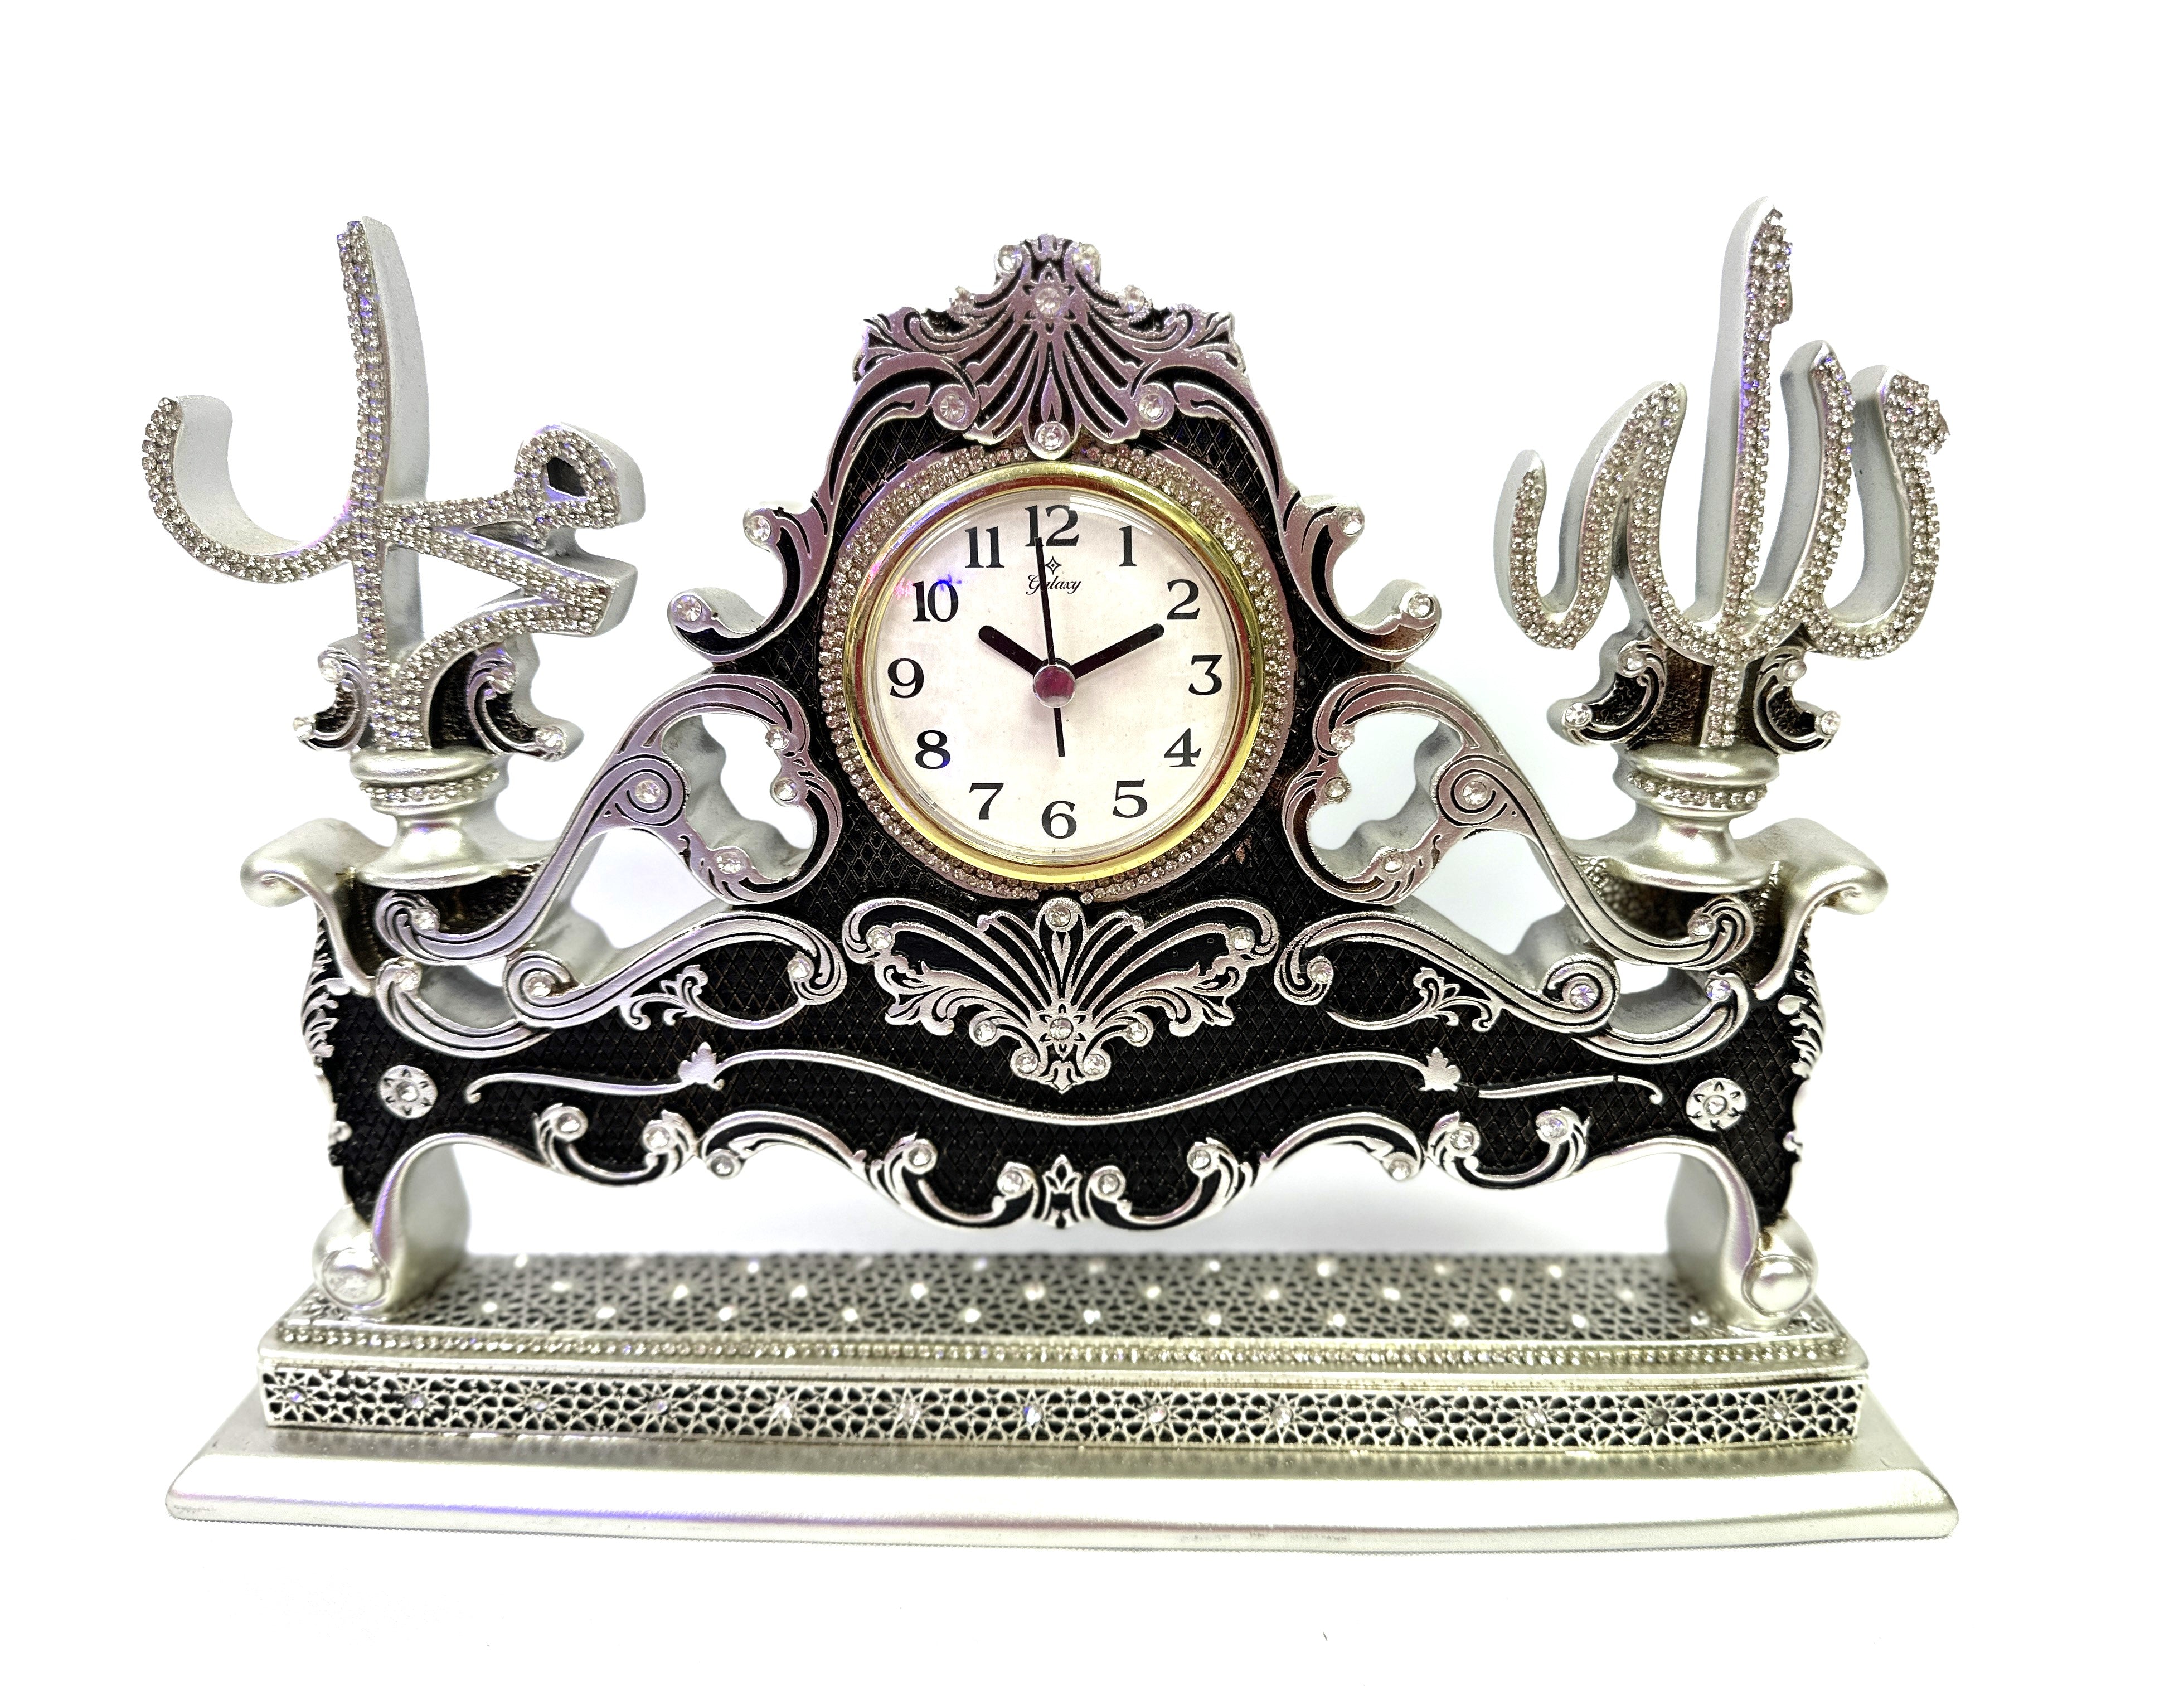 Islamic clock with silver style and shining crystals